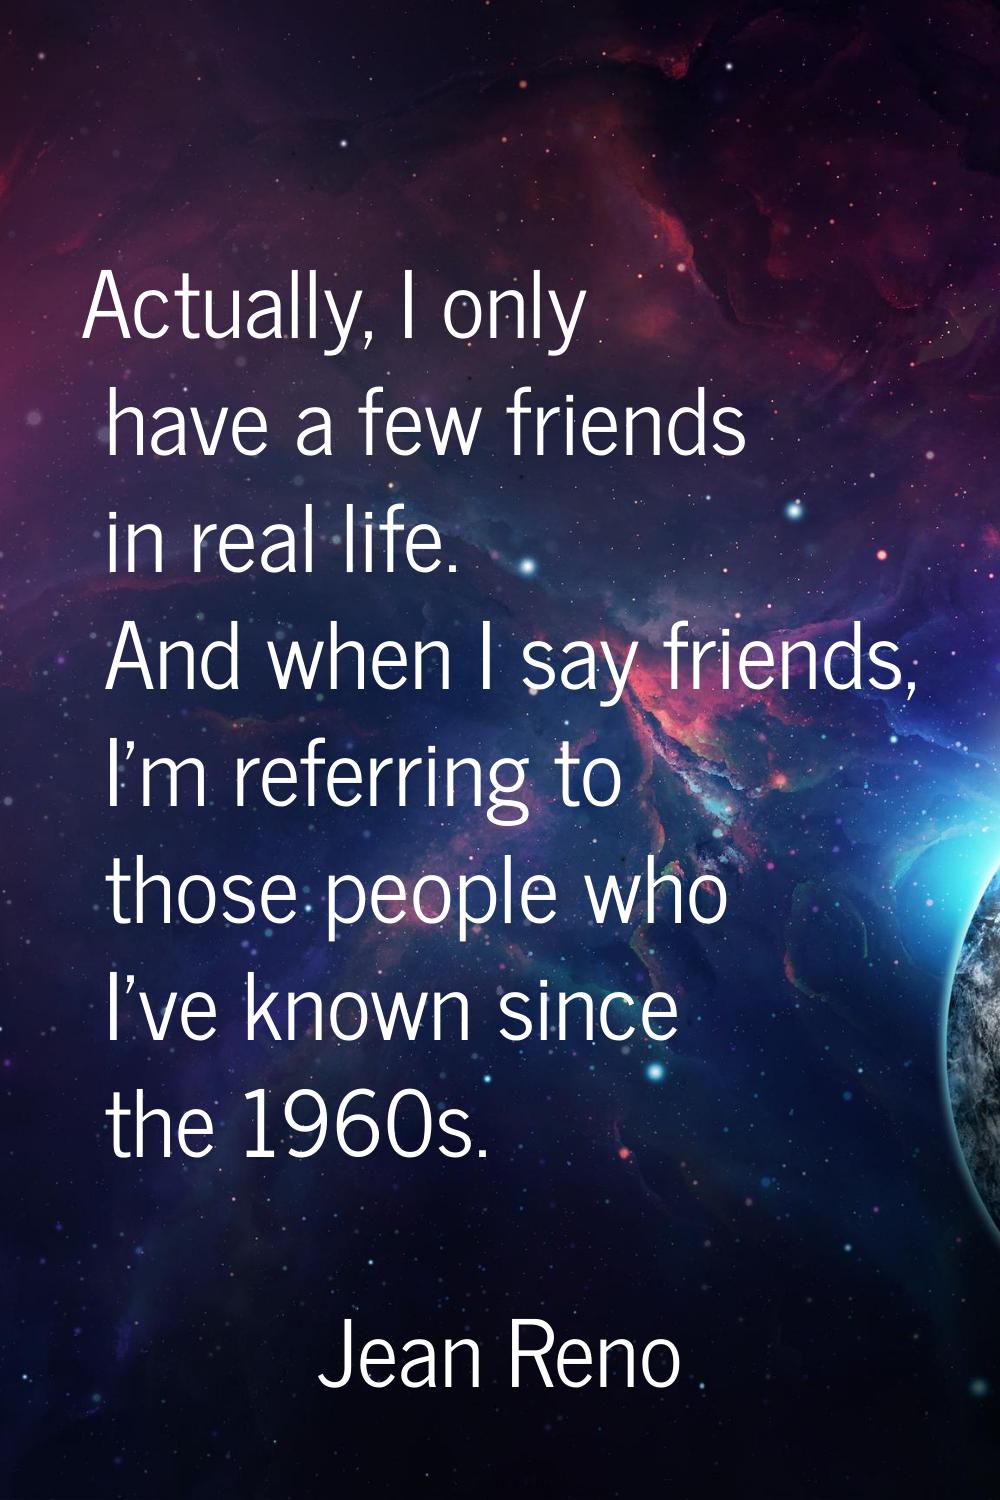 Actually, I only have a few friends in real life. And when I say friends, I'm referring to those pe